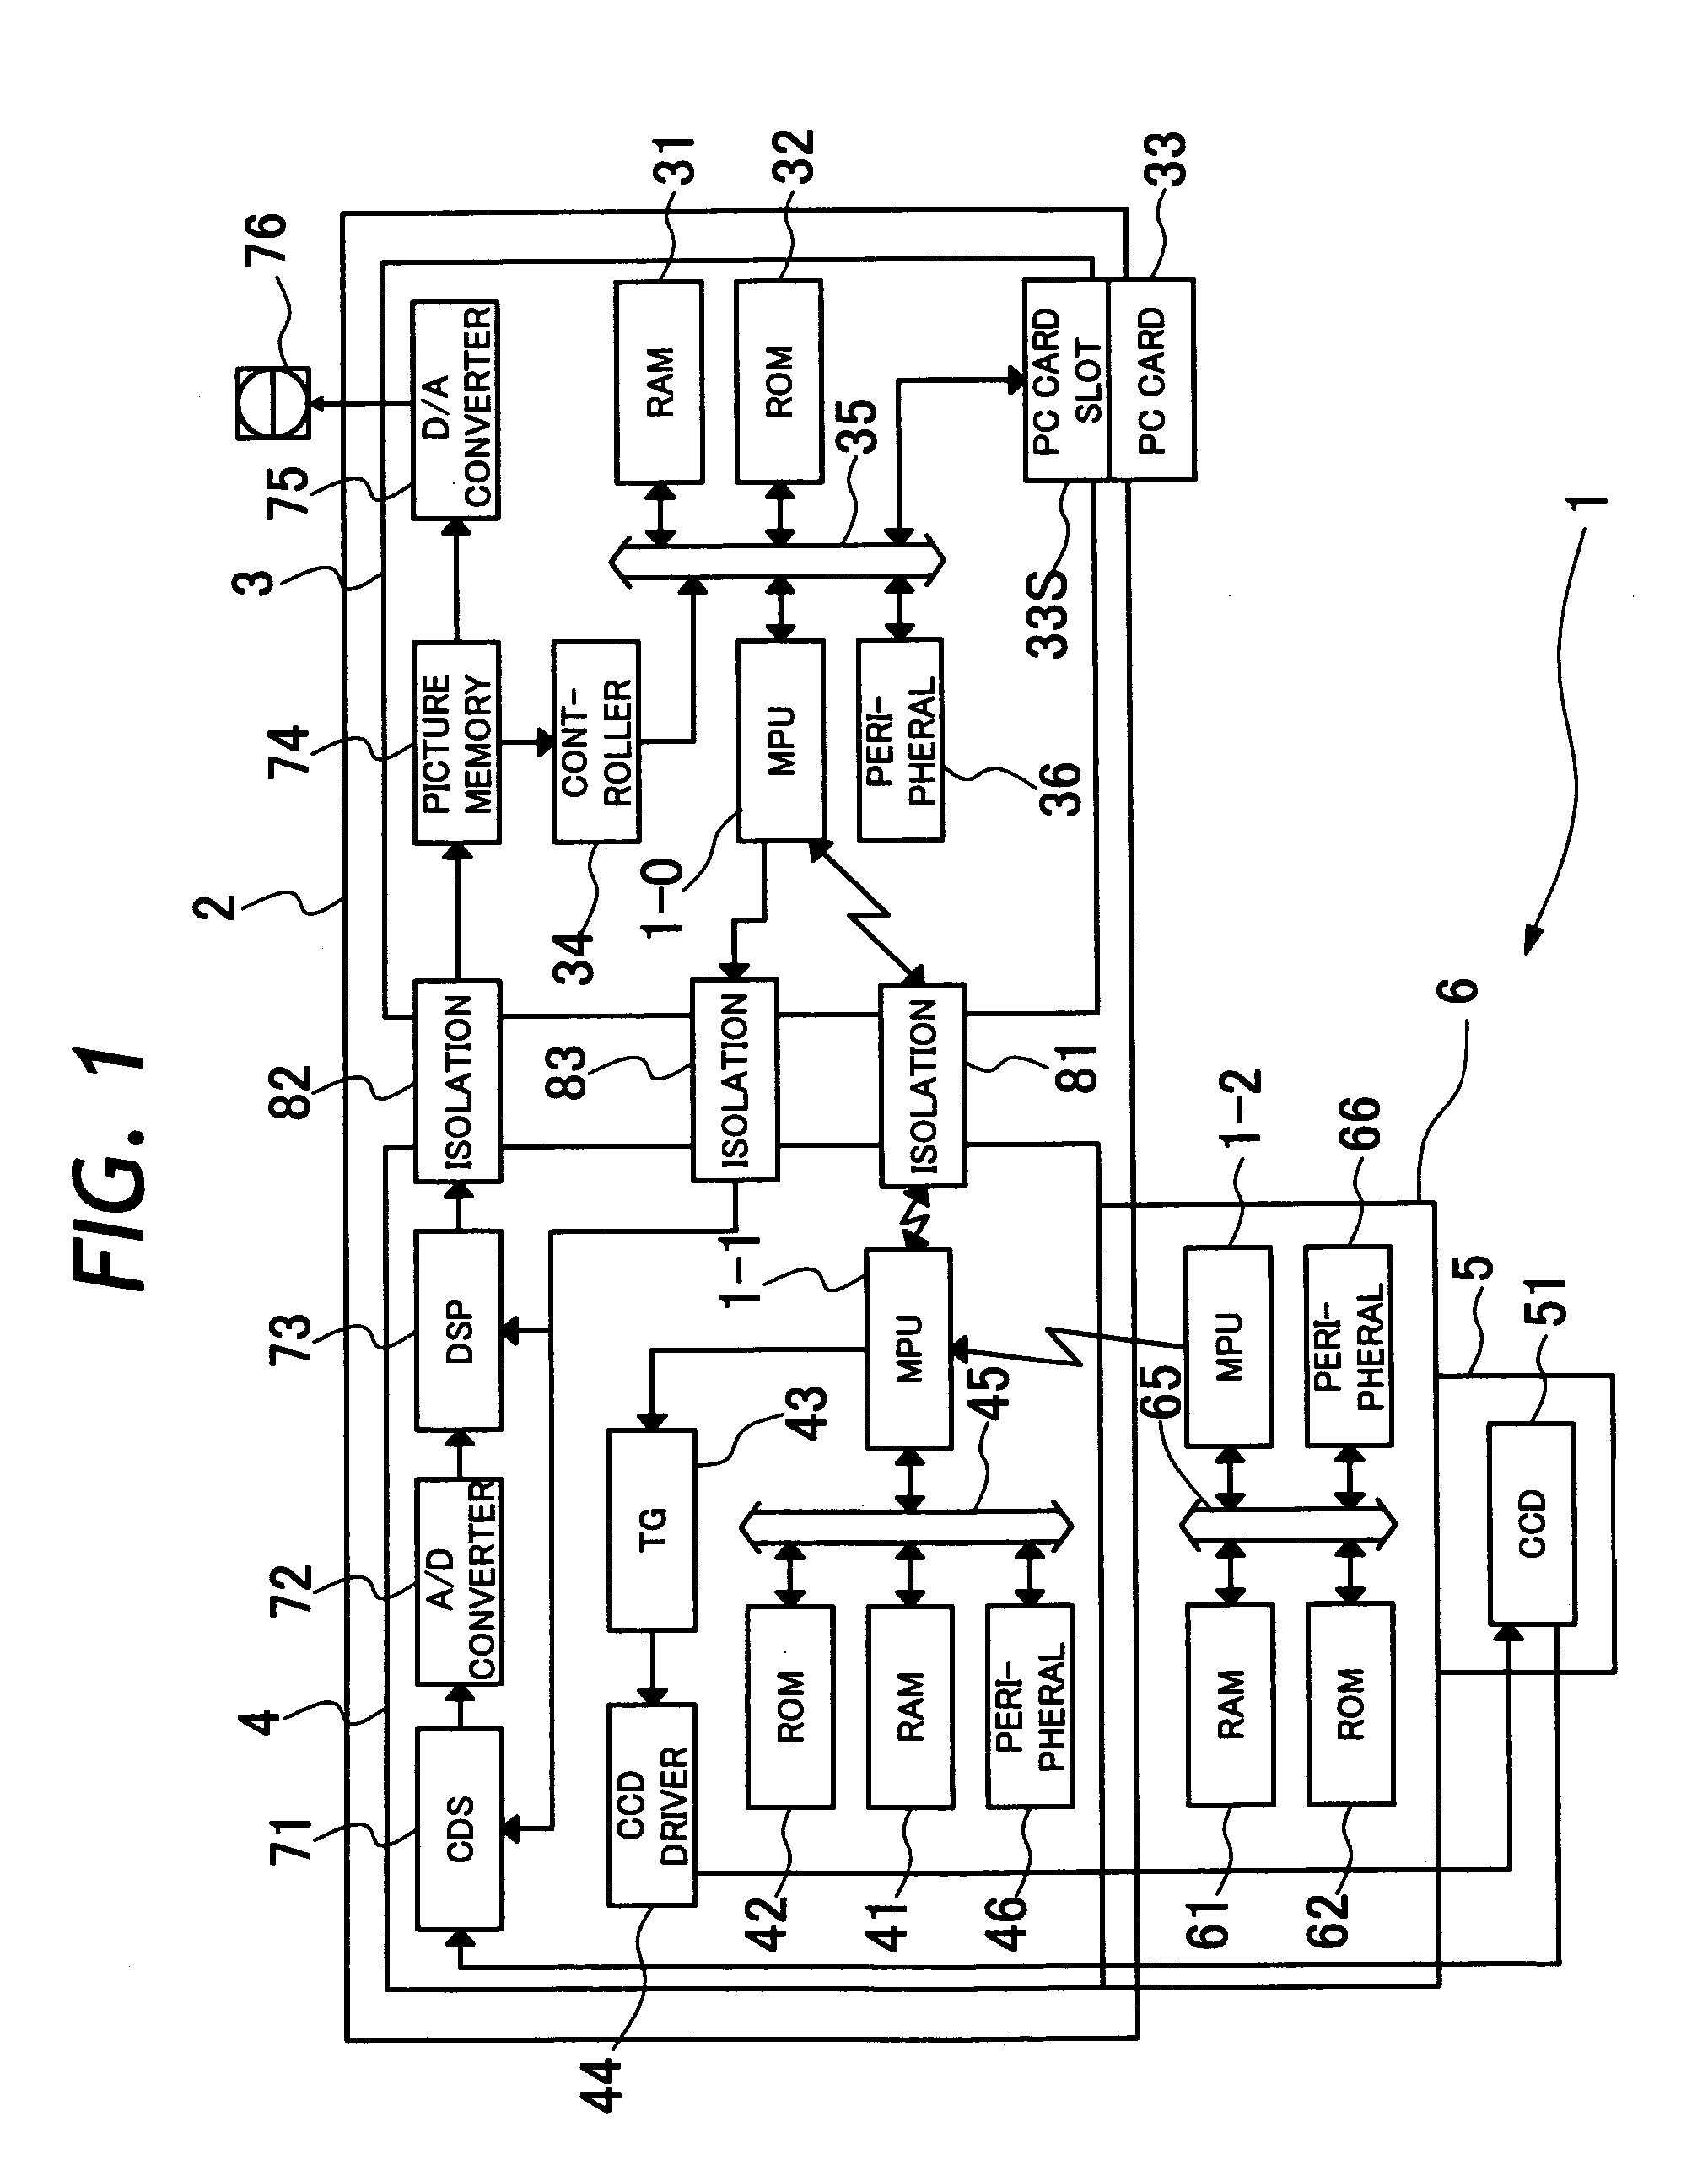 Electronic endoscope, and method for transferring programs